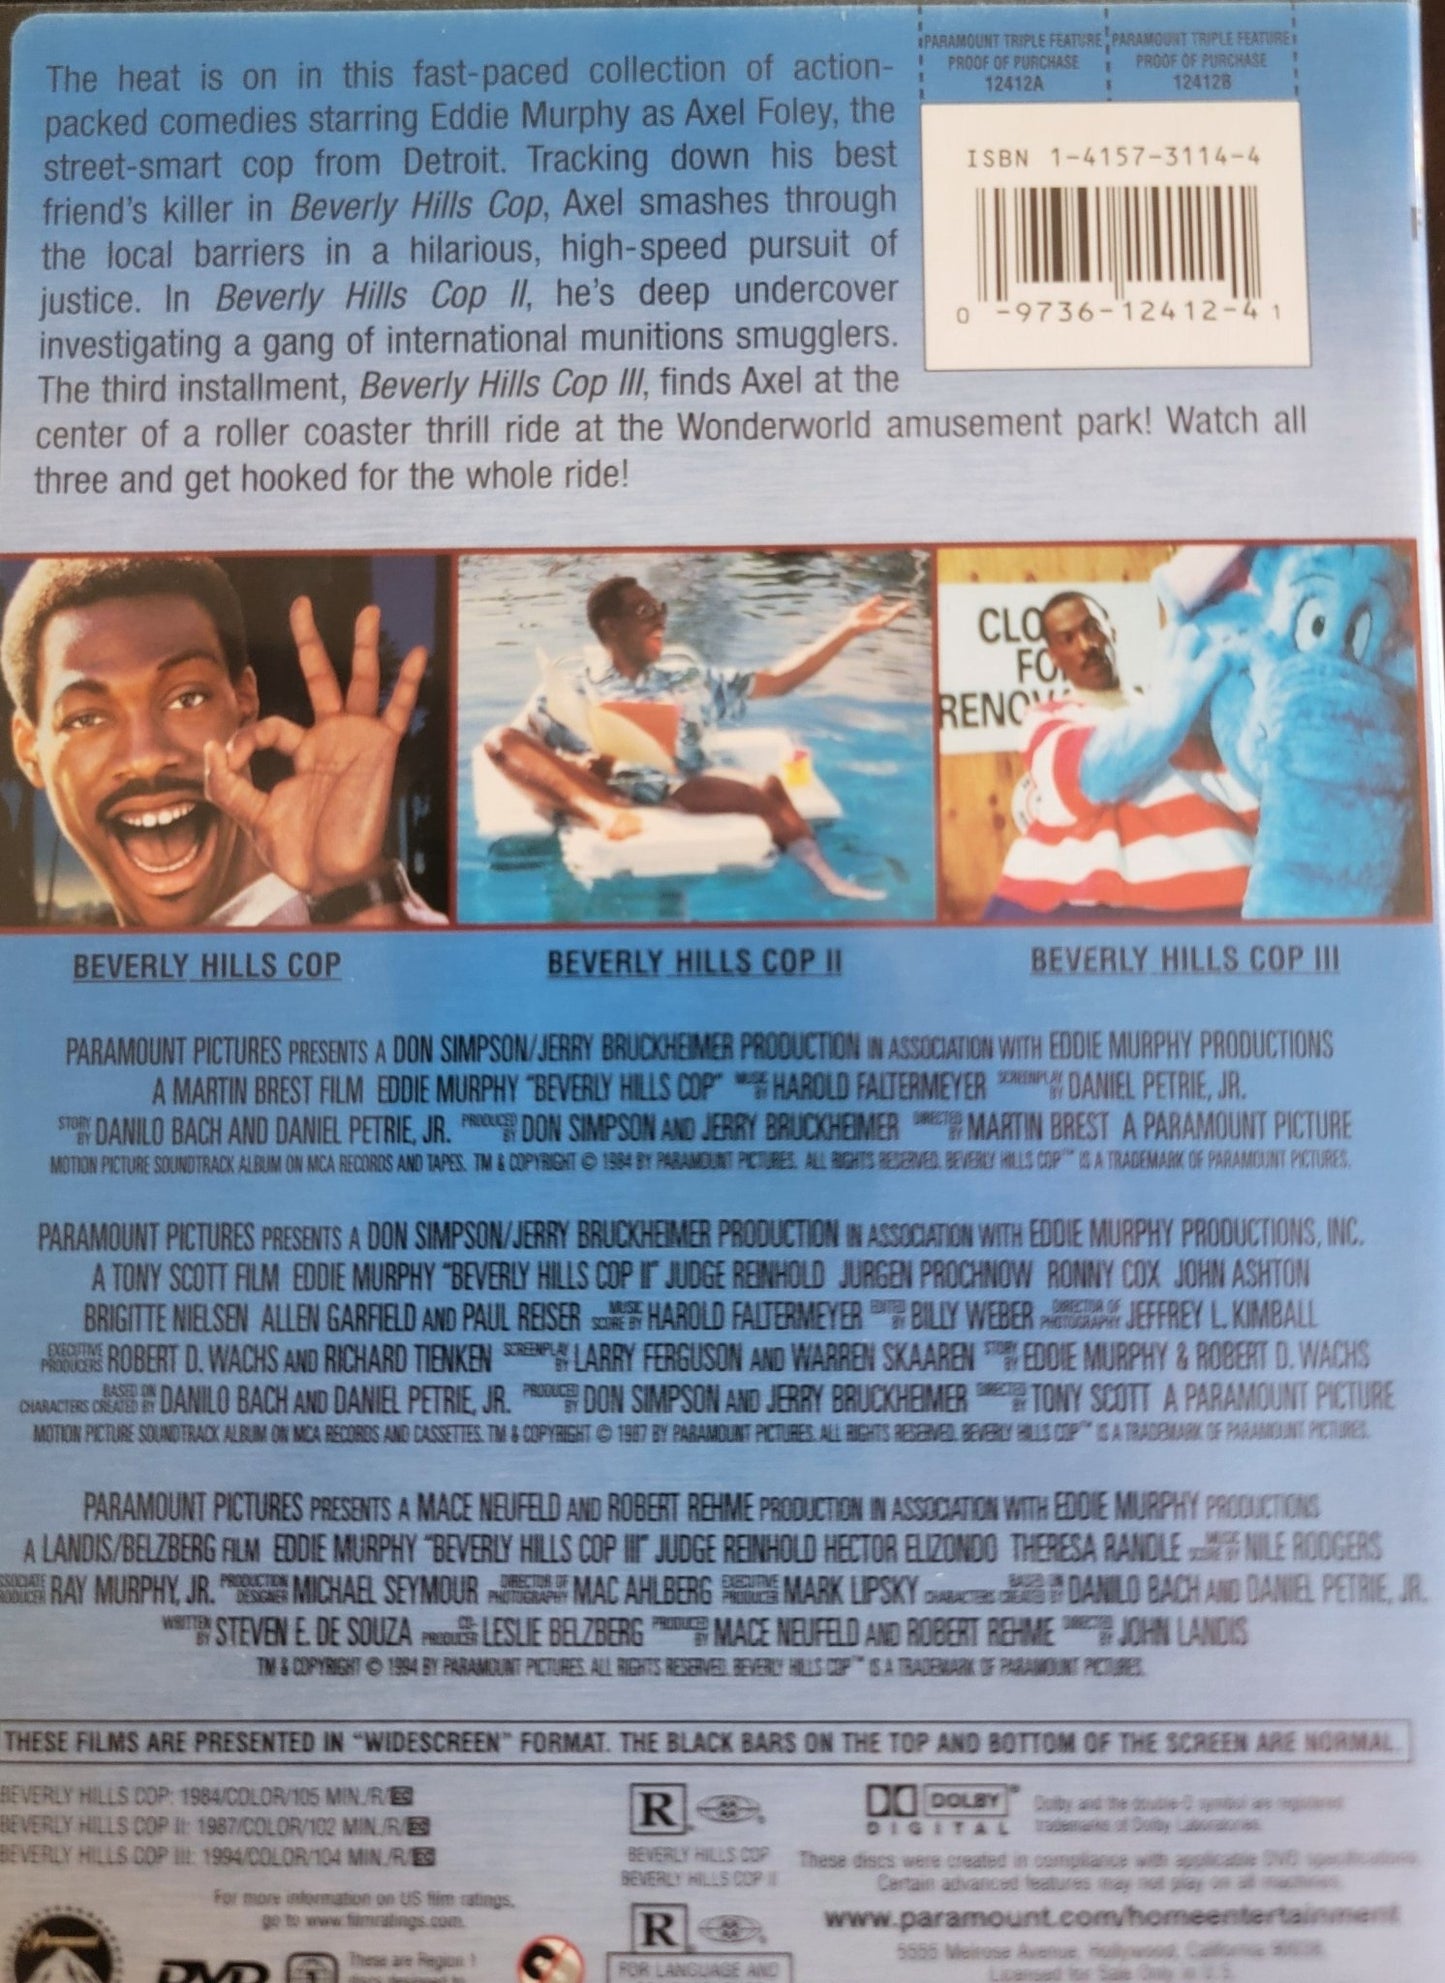 Paramount Pictures Home Entertainment - Triple Feature Beverly Hills Cop, Beverly Hills Cop II, & Beverly Hills Cop III | DVD | Widescreen - DVD - Steady Bunny Shop